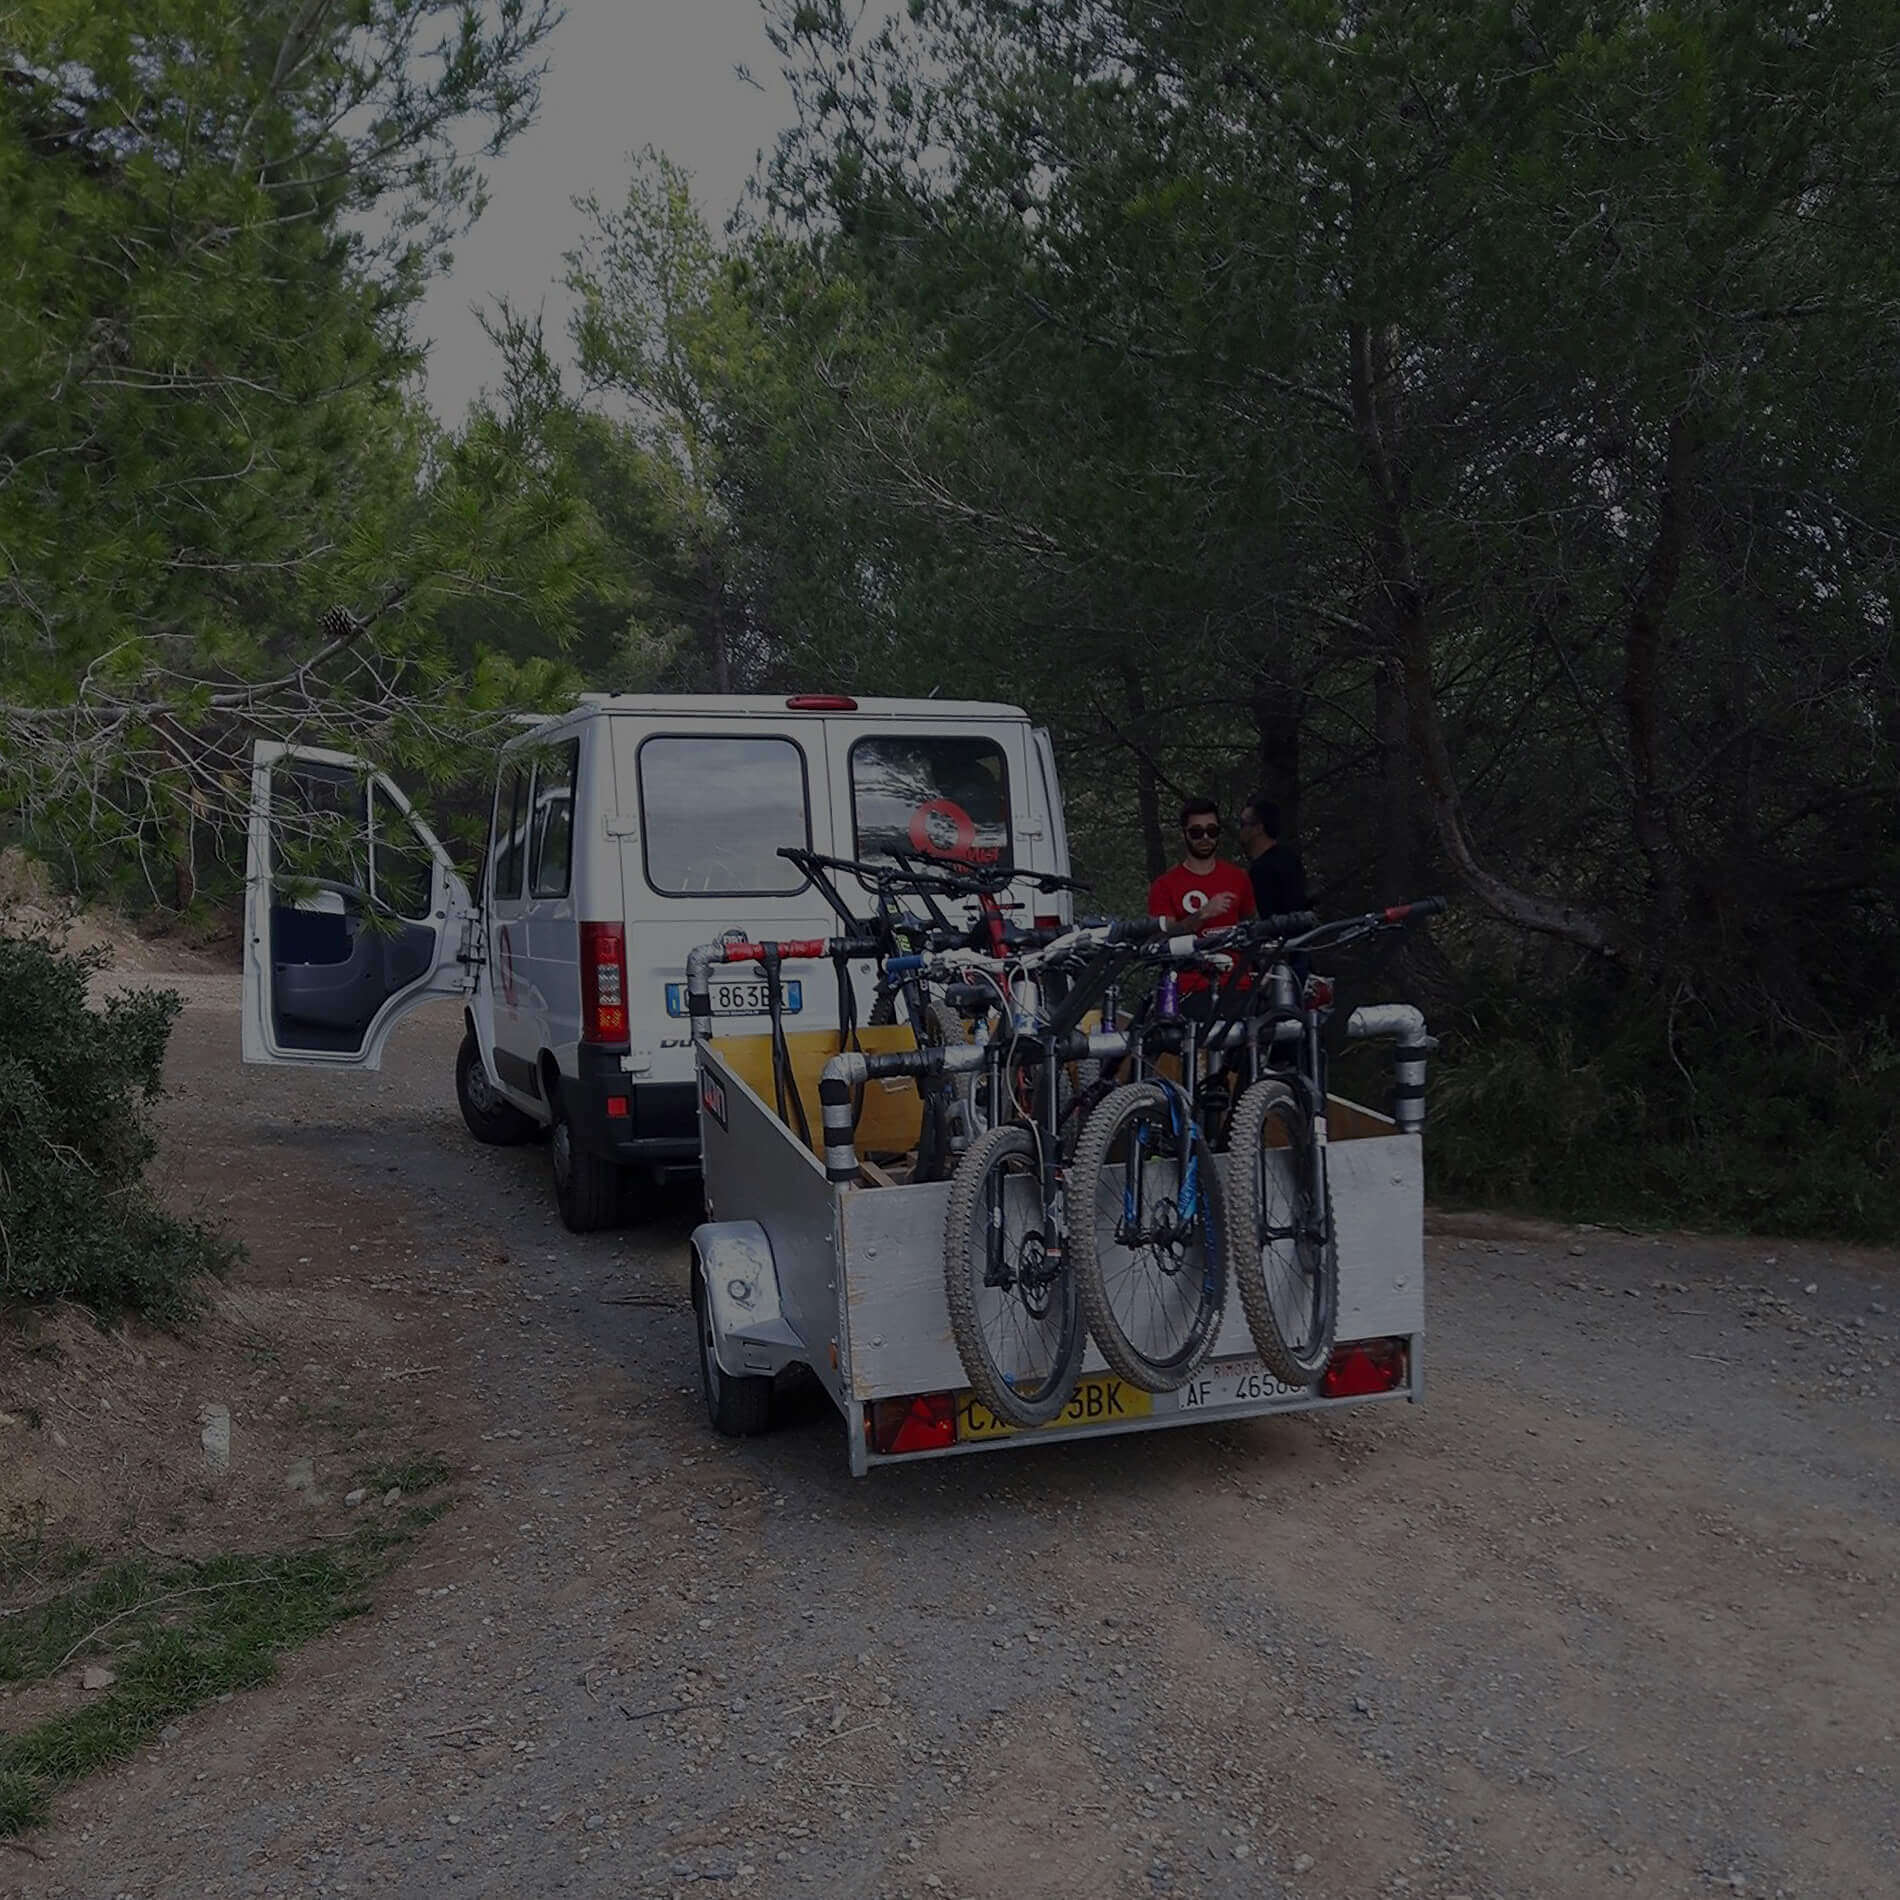 Discover the services of Omnia Freeride bike shuttle